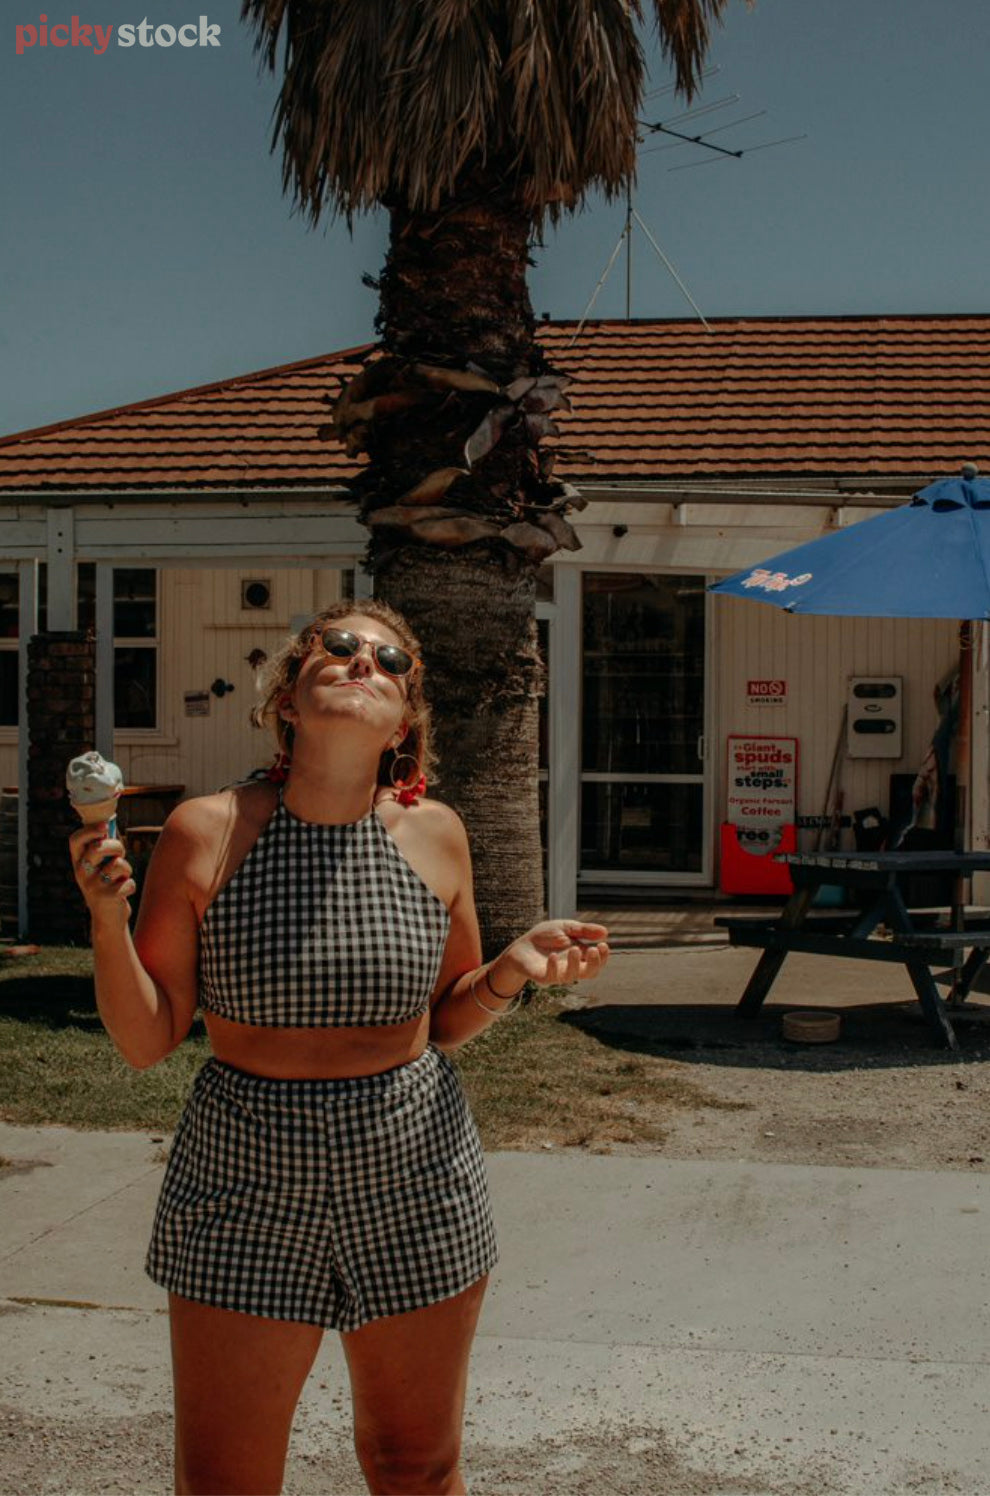 A young lady in a match-ing two piece gingham outfit pulls a funny face to the camera as he eats her classic Kiwi ice-cream on a hot summers day. She stands outside the ice cream shop under an old large palm tree.